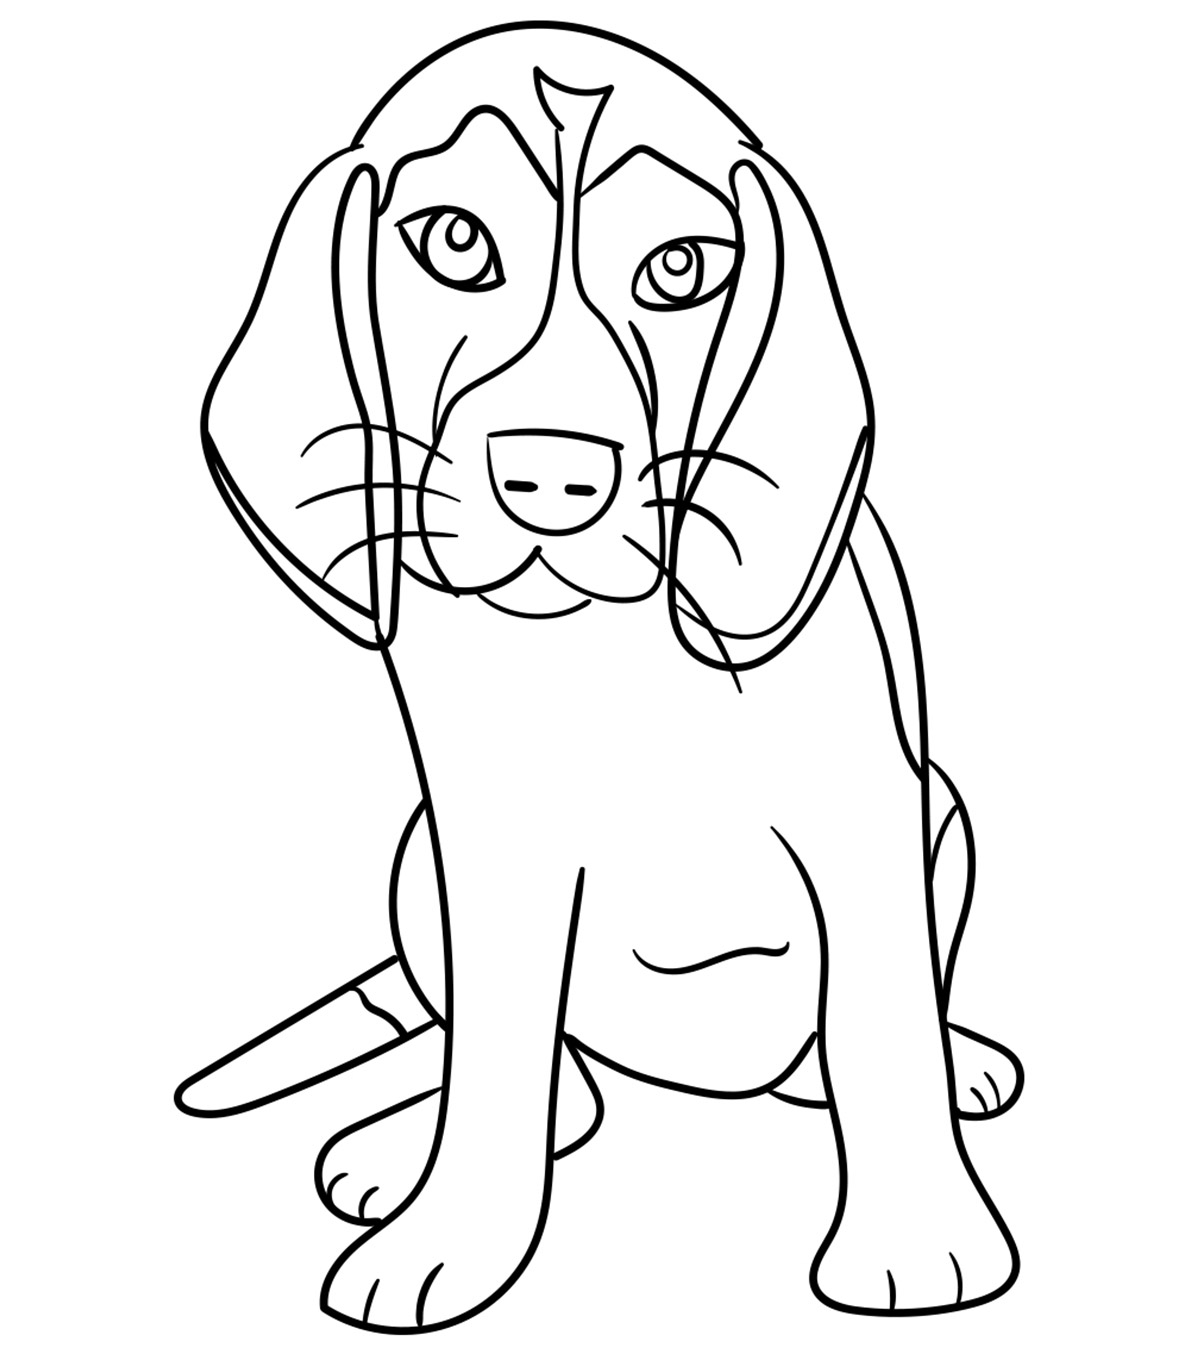 25 Cute & Funny Dog Coloring Pages Your Toddler Will Love To Color